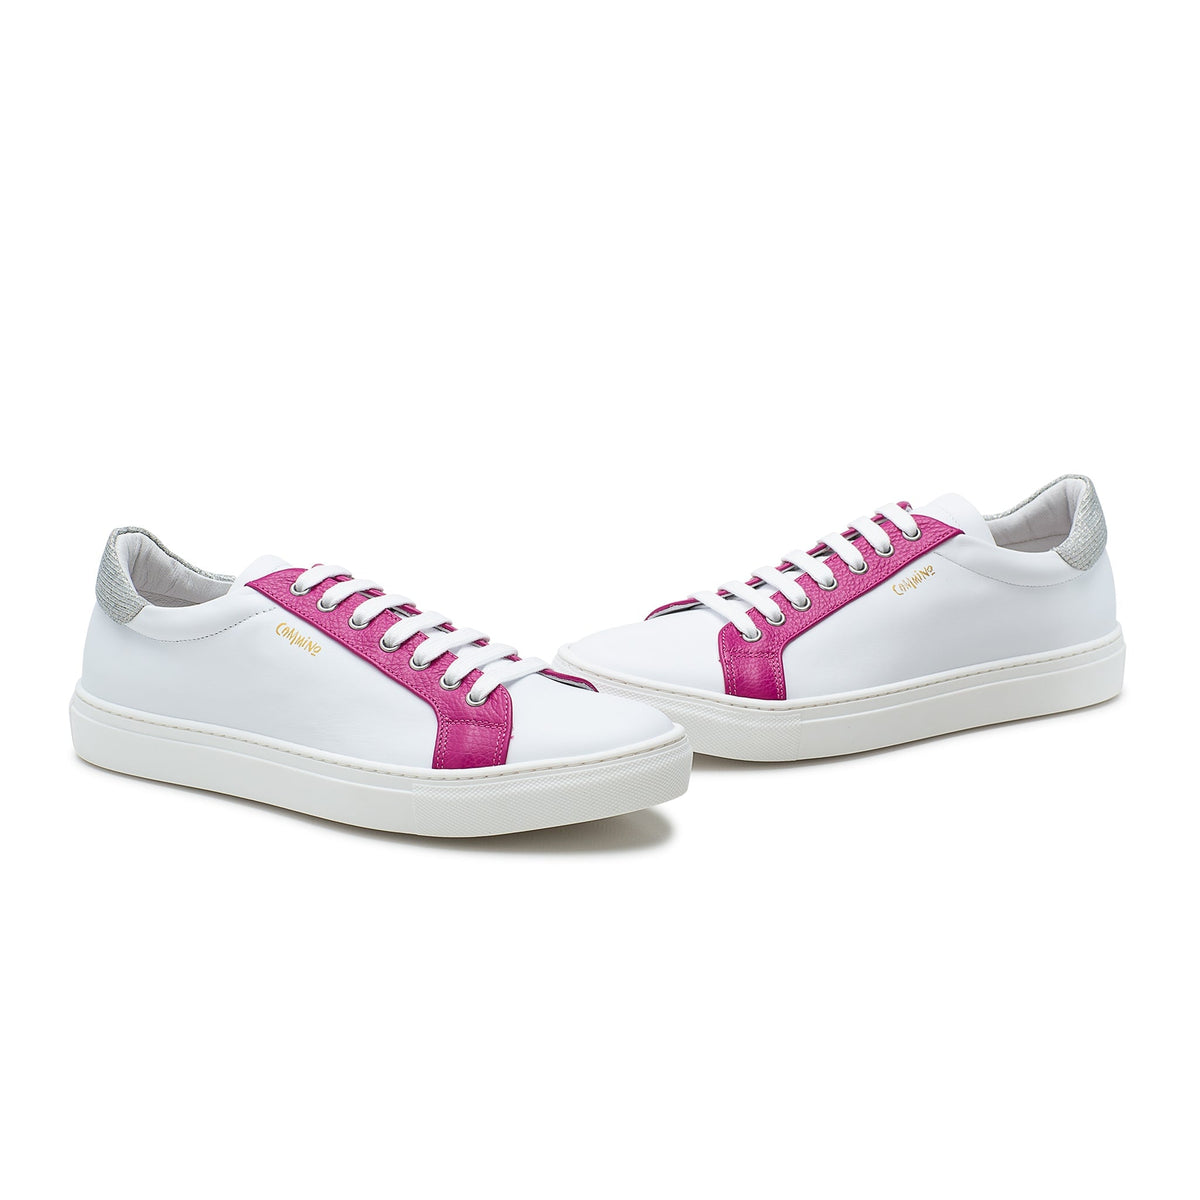 Orvieto - Pink and Silver Sparkles Sneaker Sneakers Cammino Shoes 